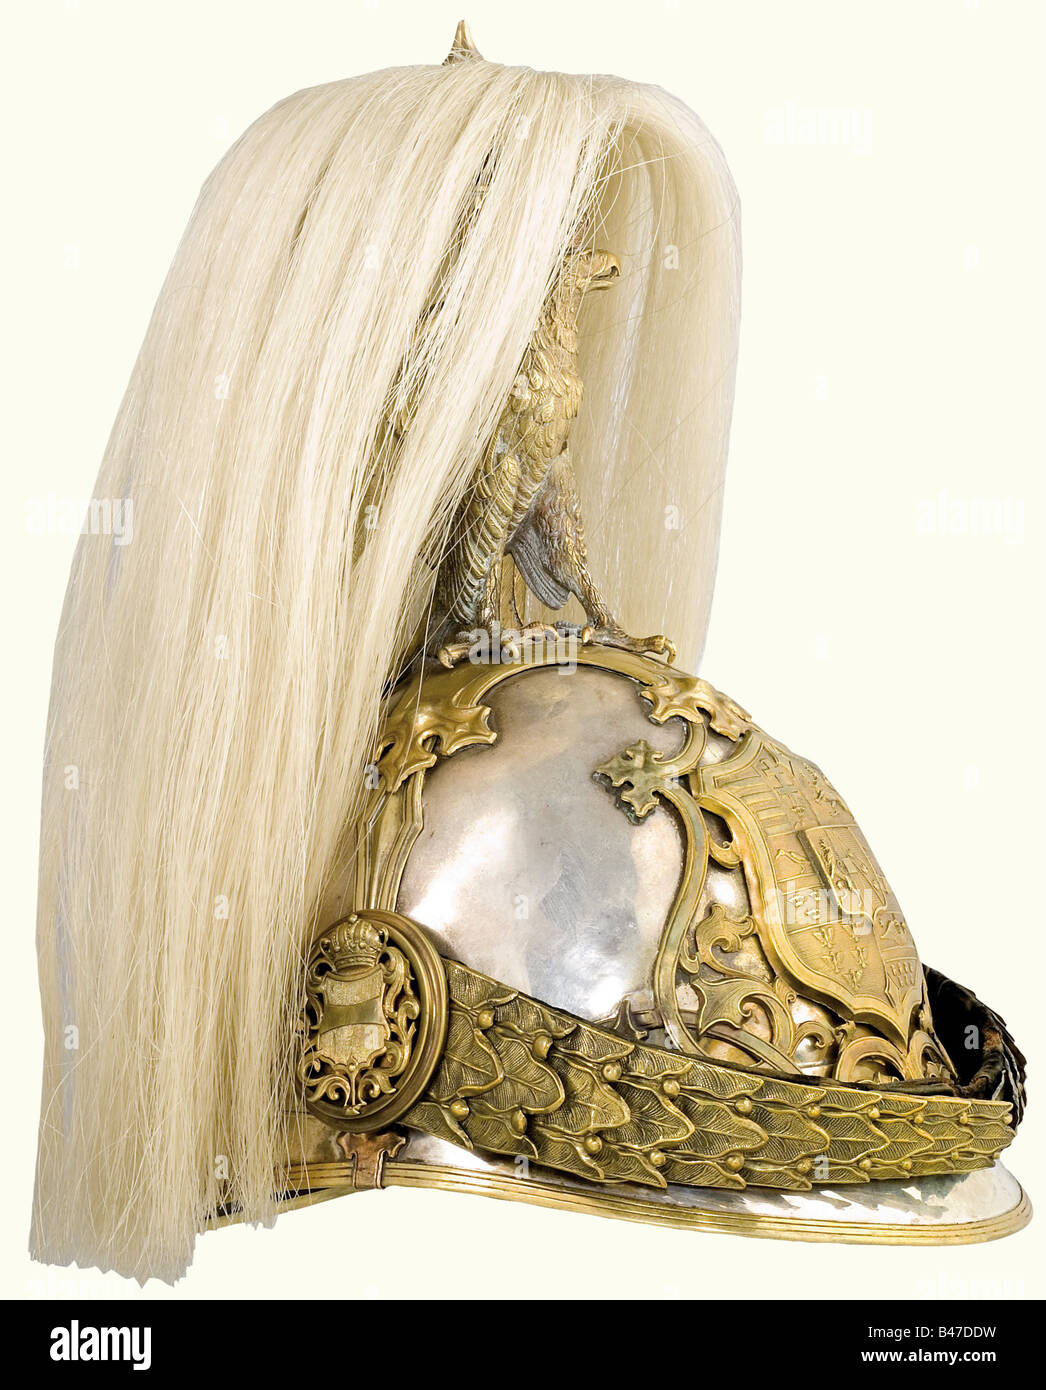 A helmet for the k.u.k First Arcieren Life Guards, according to the 1905 regular for equipment and uniforms of the First Arcieren Life Guards. Silver skull, with incomplete Diana head's silver hallmark (800), the master's mark 'HS' on the nape. Armoury stamps 'N31' and '37D'. The bronze, crowned double eagle and the beautifully worked mountings are fire-gilded with abrasions in places. The metal chinscales are backed with black velvet. Black coloured silk lining, artificial leather sweatband. White horse hair plume to be mounted behind the neck of the double ea, Stock Photo